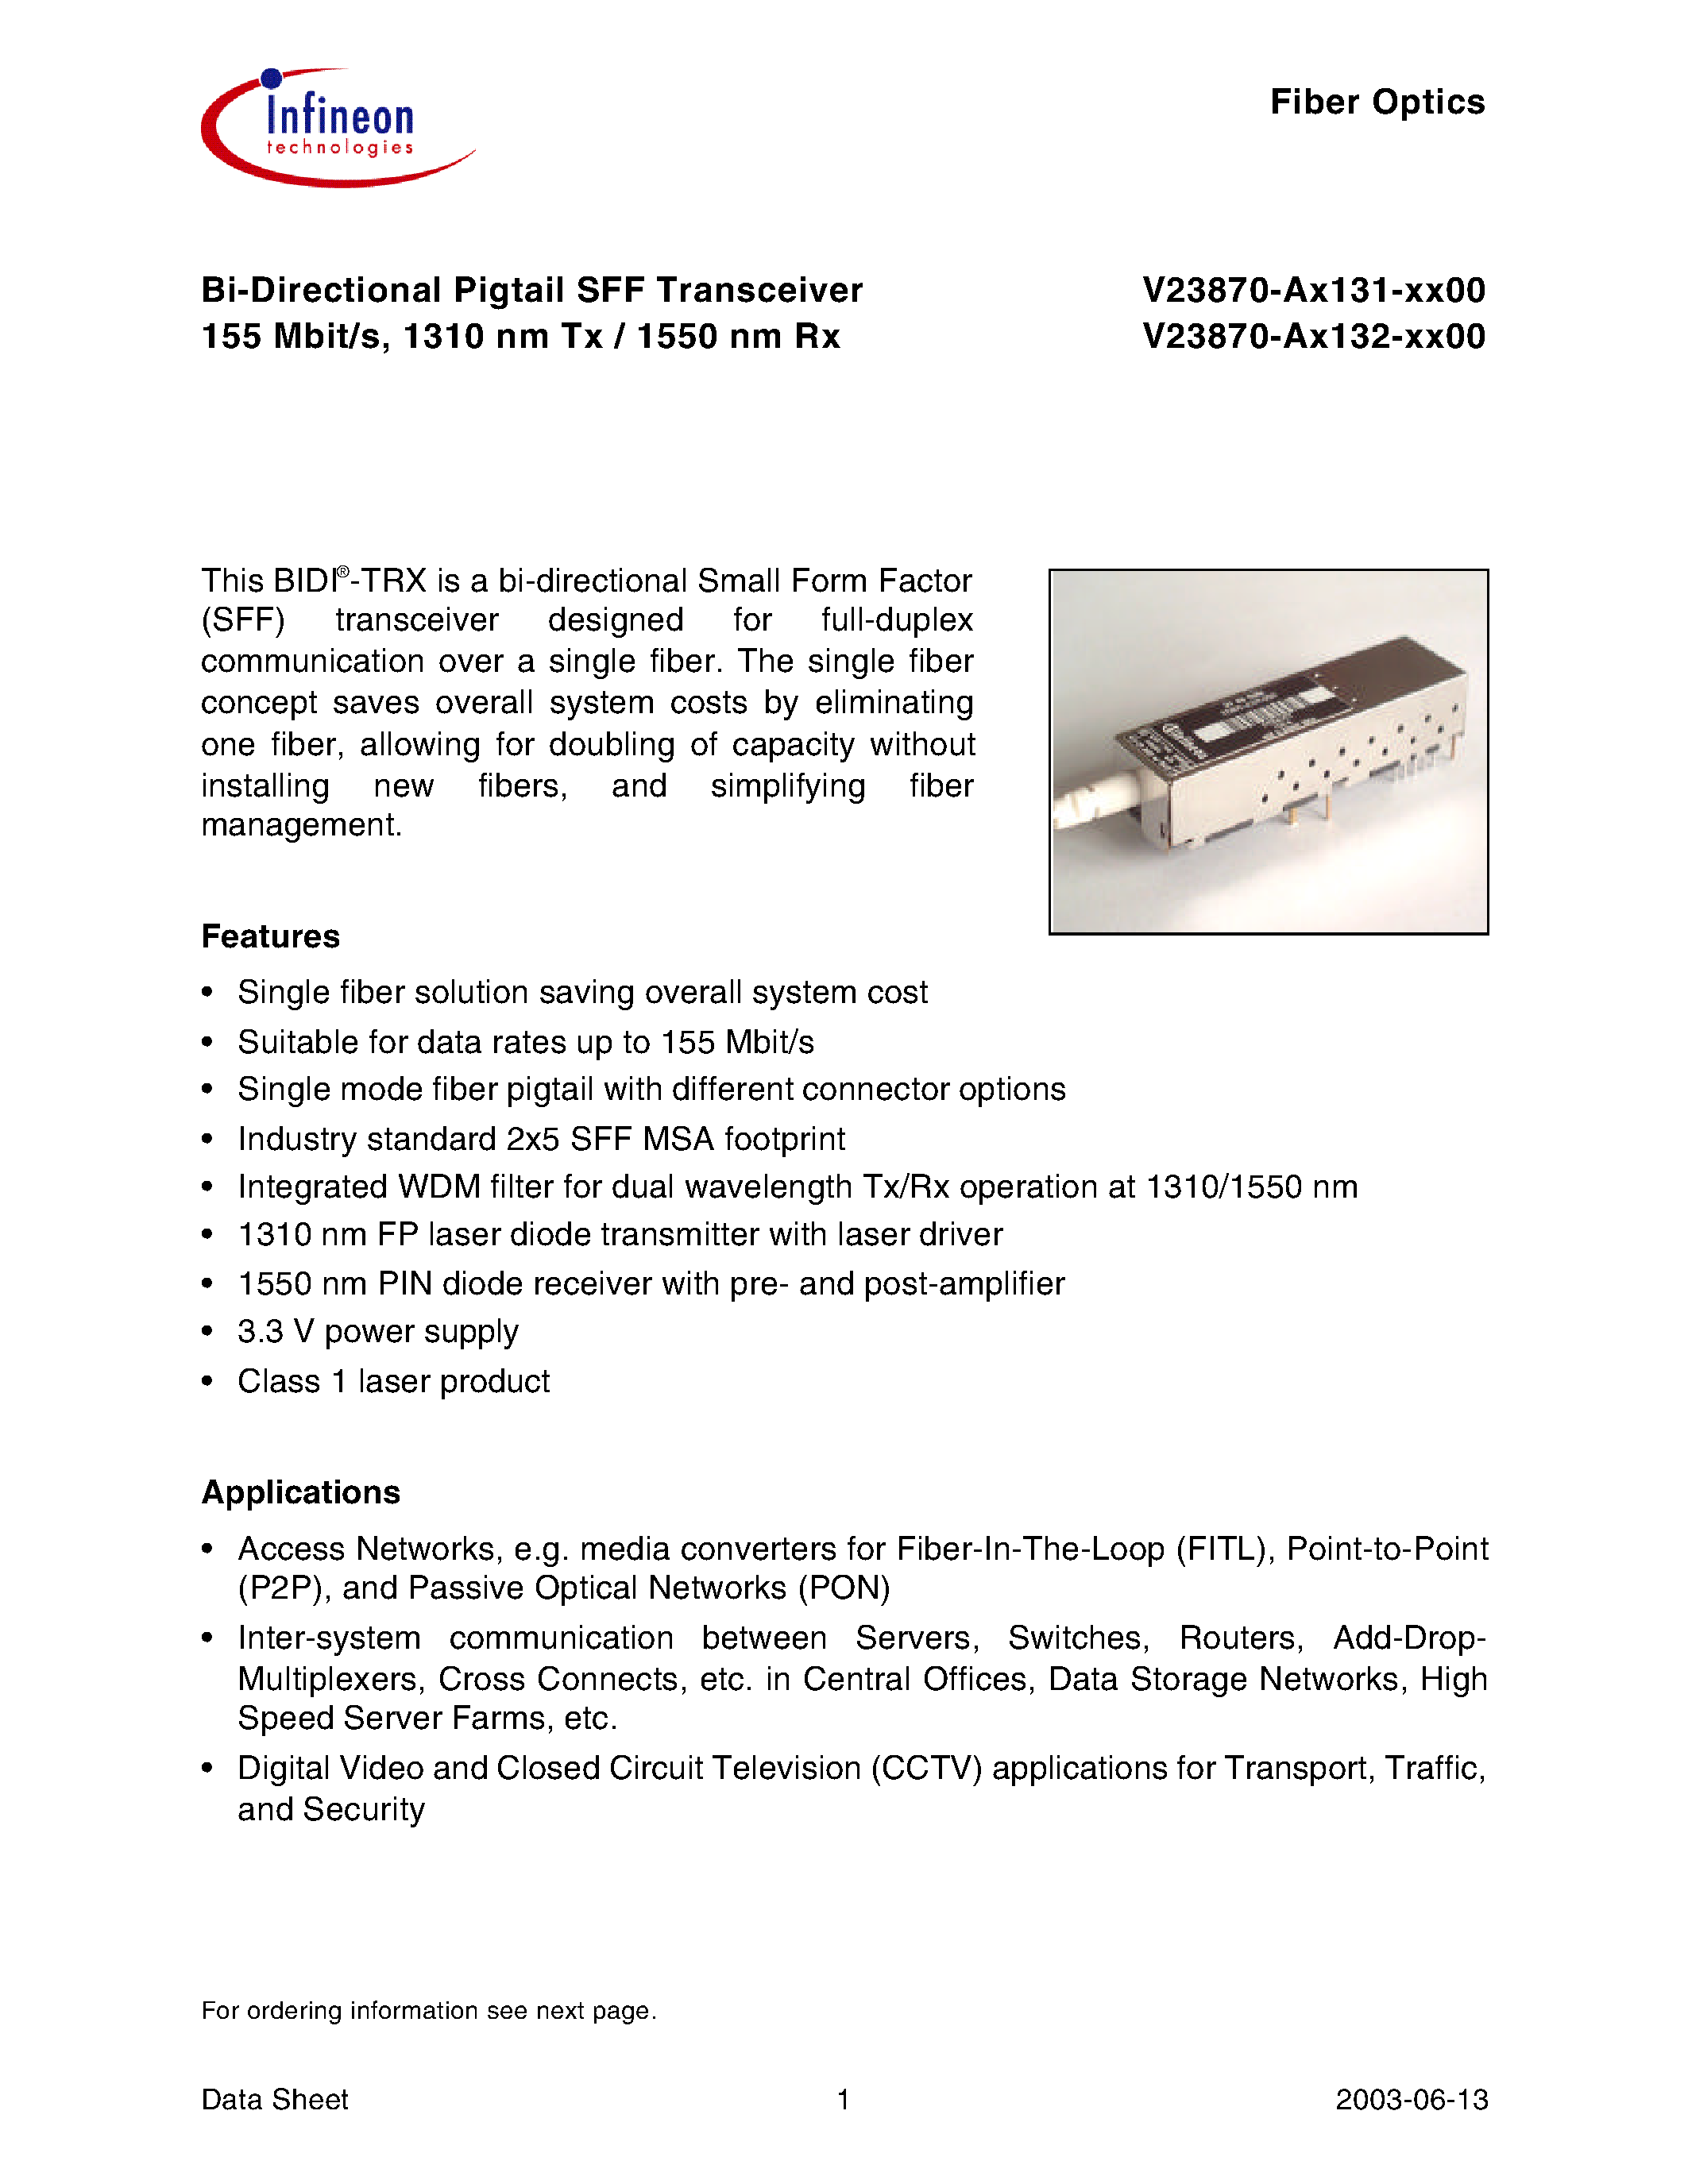 Datasheet V23870-A1132-C600 - Bi-Directional Pigtail SFF Transceiver 155 Mbit/s/ 1310 nm Tx / 1550 nm Rx page 1